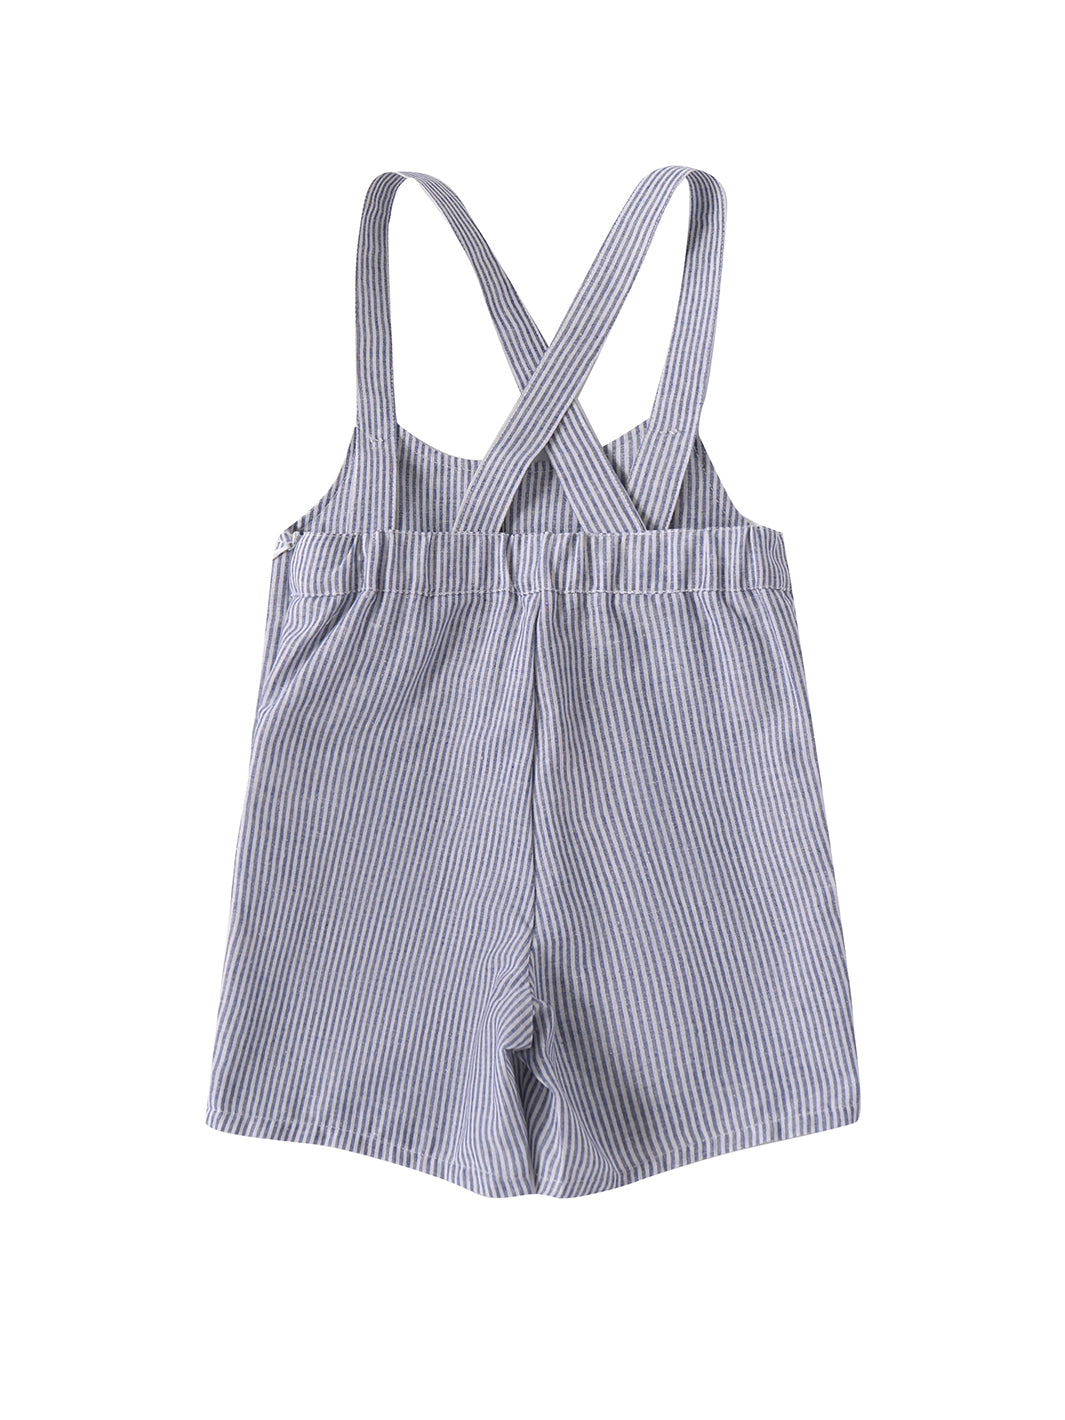 Baby Linen Striped Overall - Blue